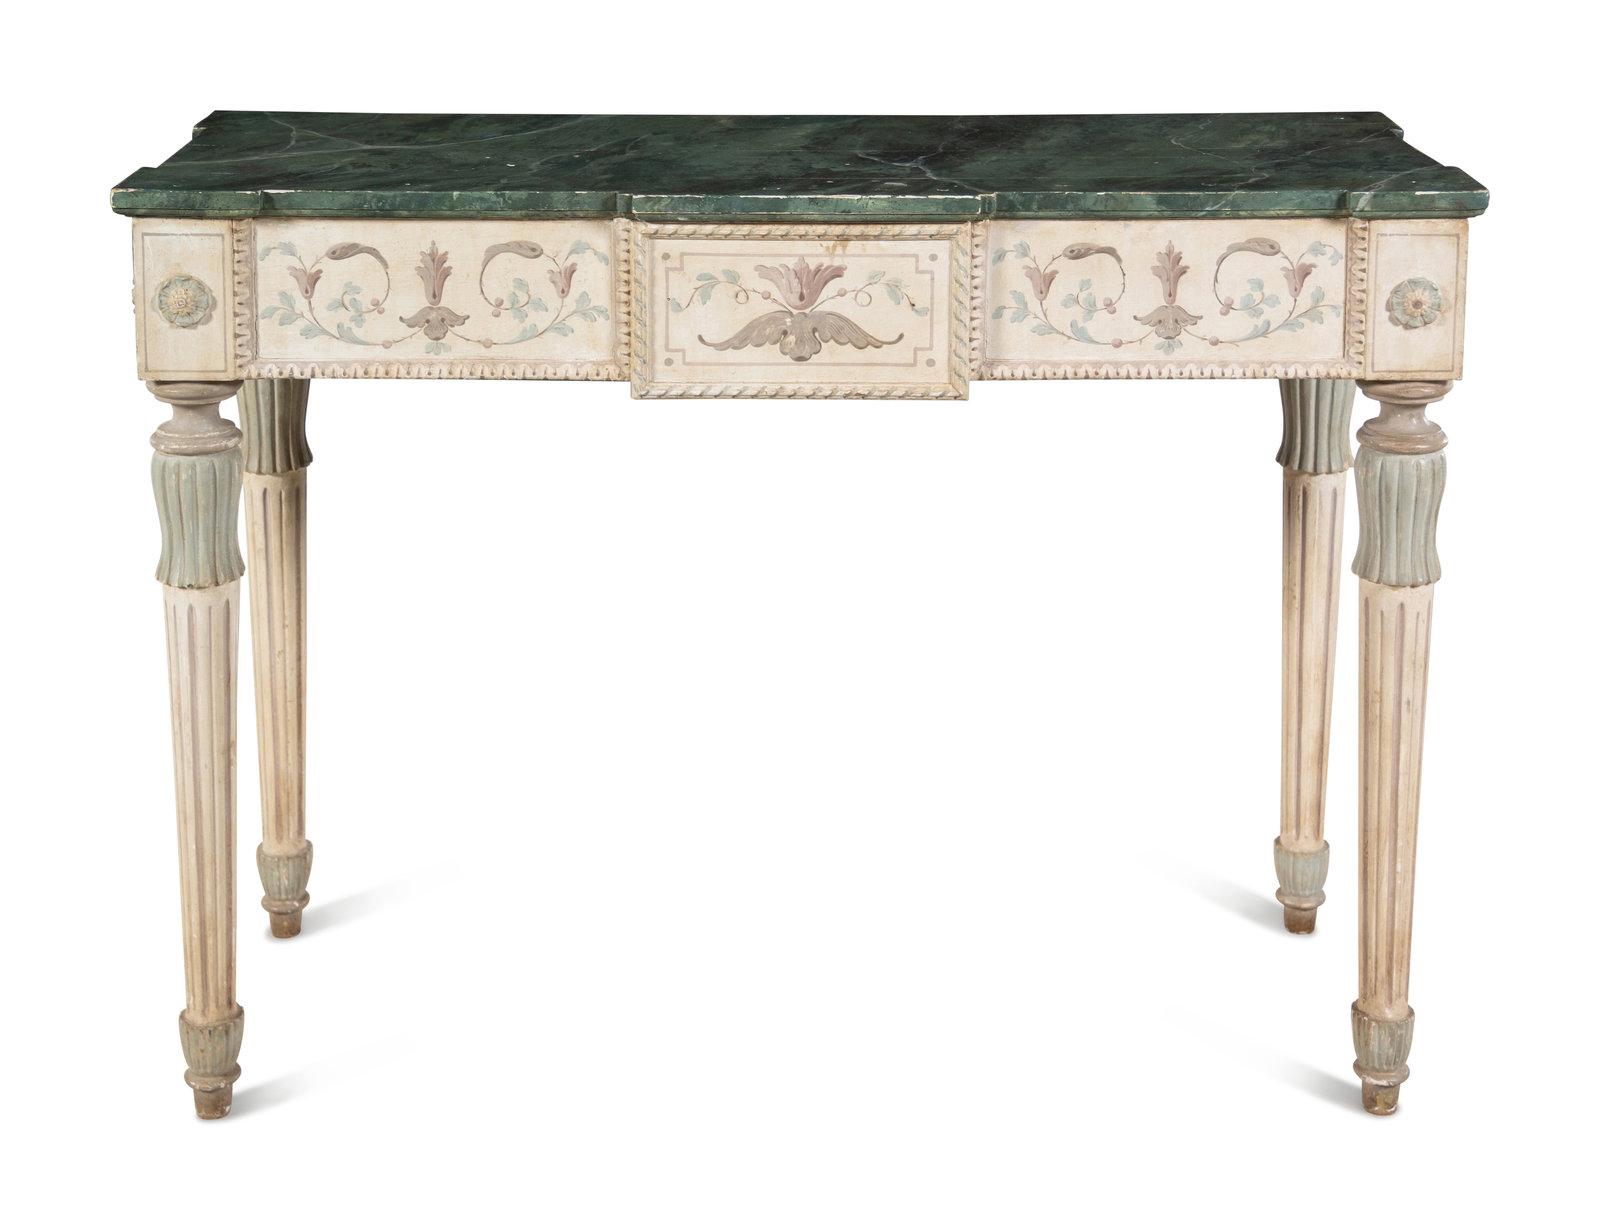 Italian Painted Console Table with a Faux Marble Top in the Louis XVI style, Late 19th